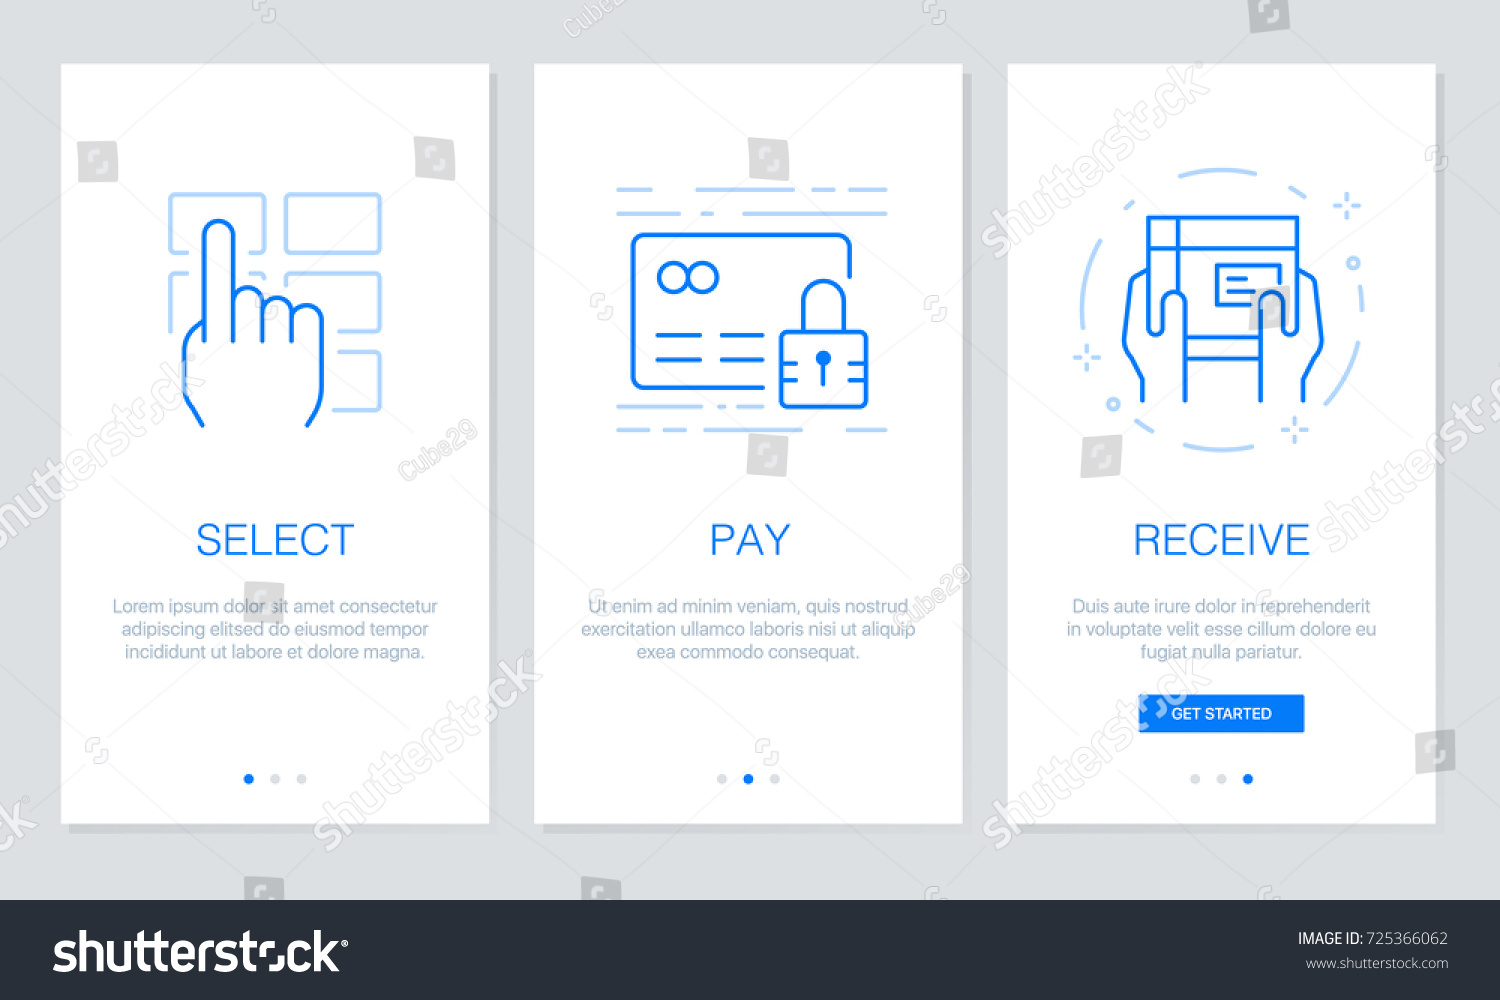 Onboarding app screens in shopping online concept. Modern and simplified vector illustration walkthrough screens template for mobile apps. #725366062